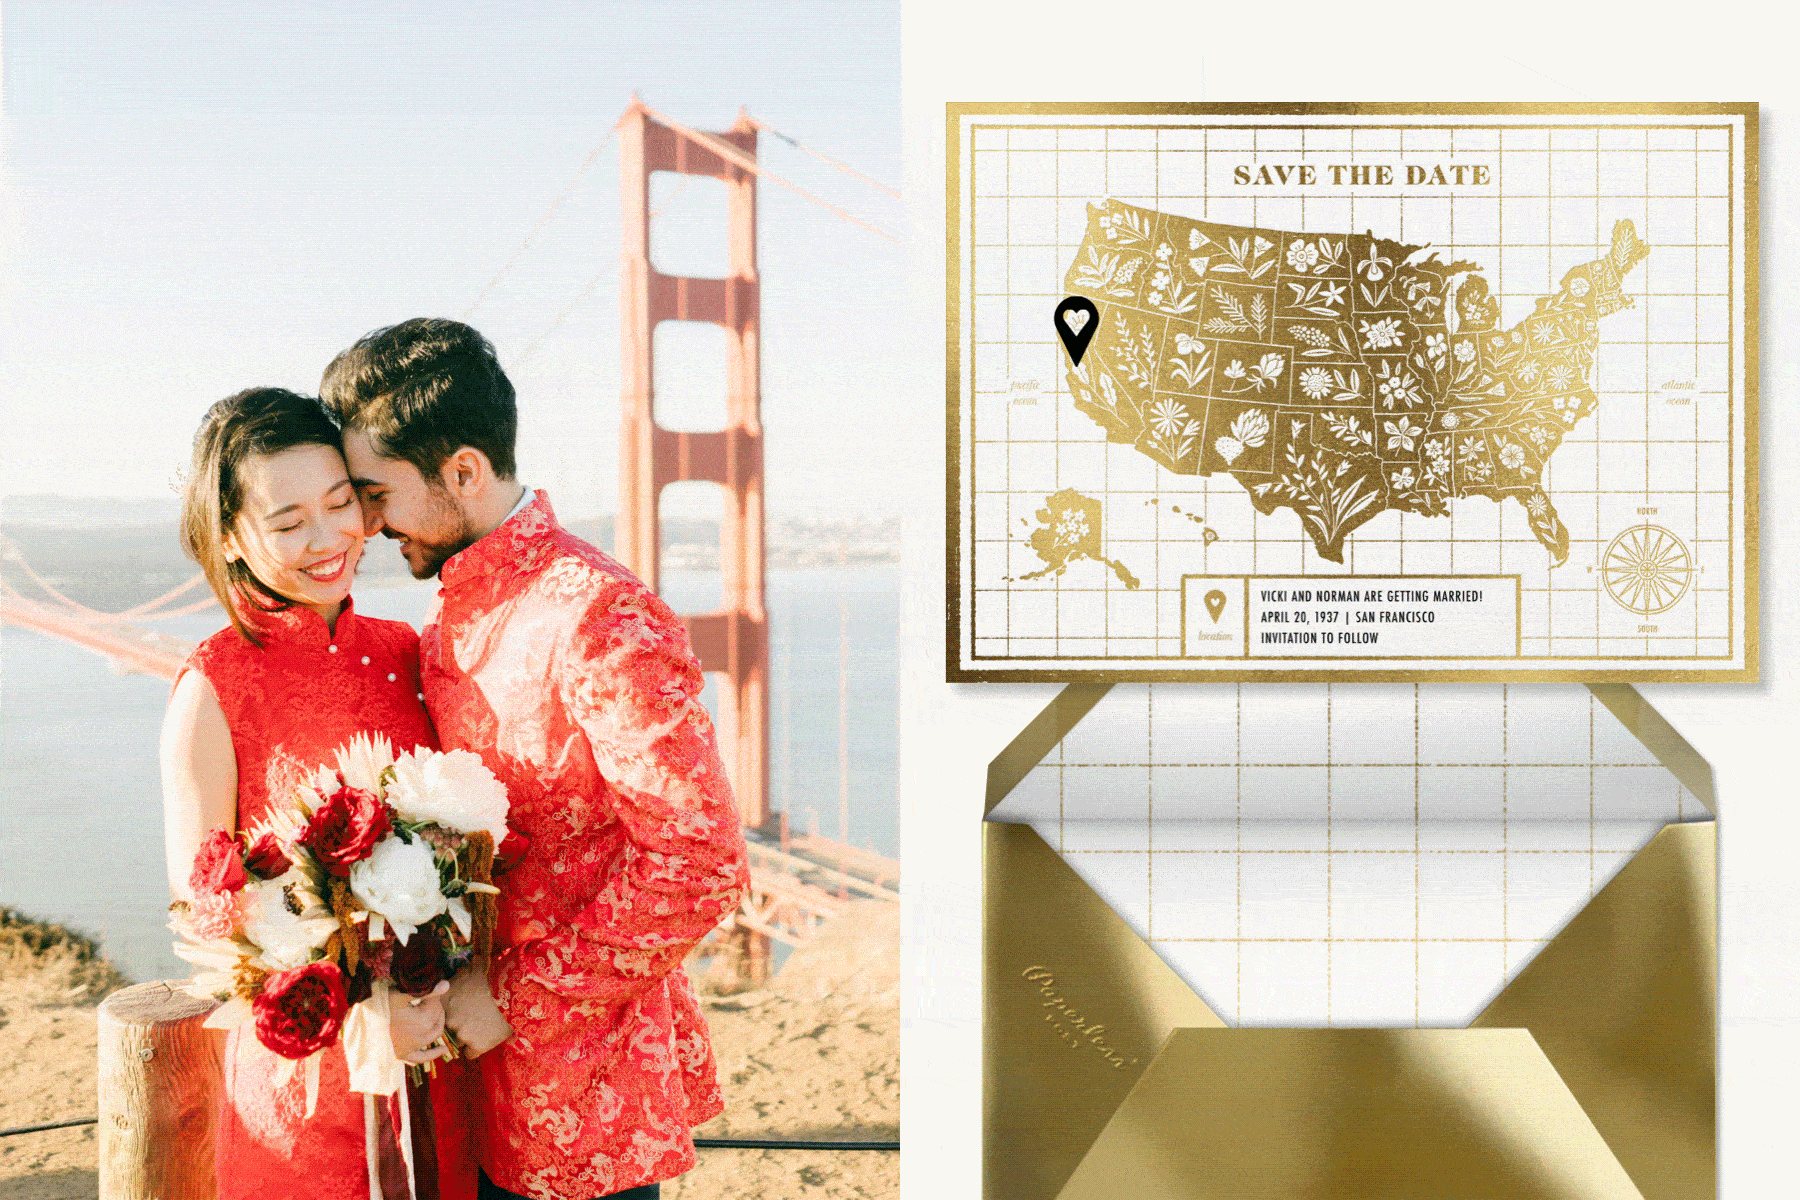 Left: A couple wearing red wedding attire in front of the Golden Gate Bridge | Left: “State of Our Union” by Paperless Post